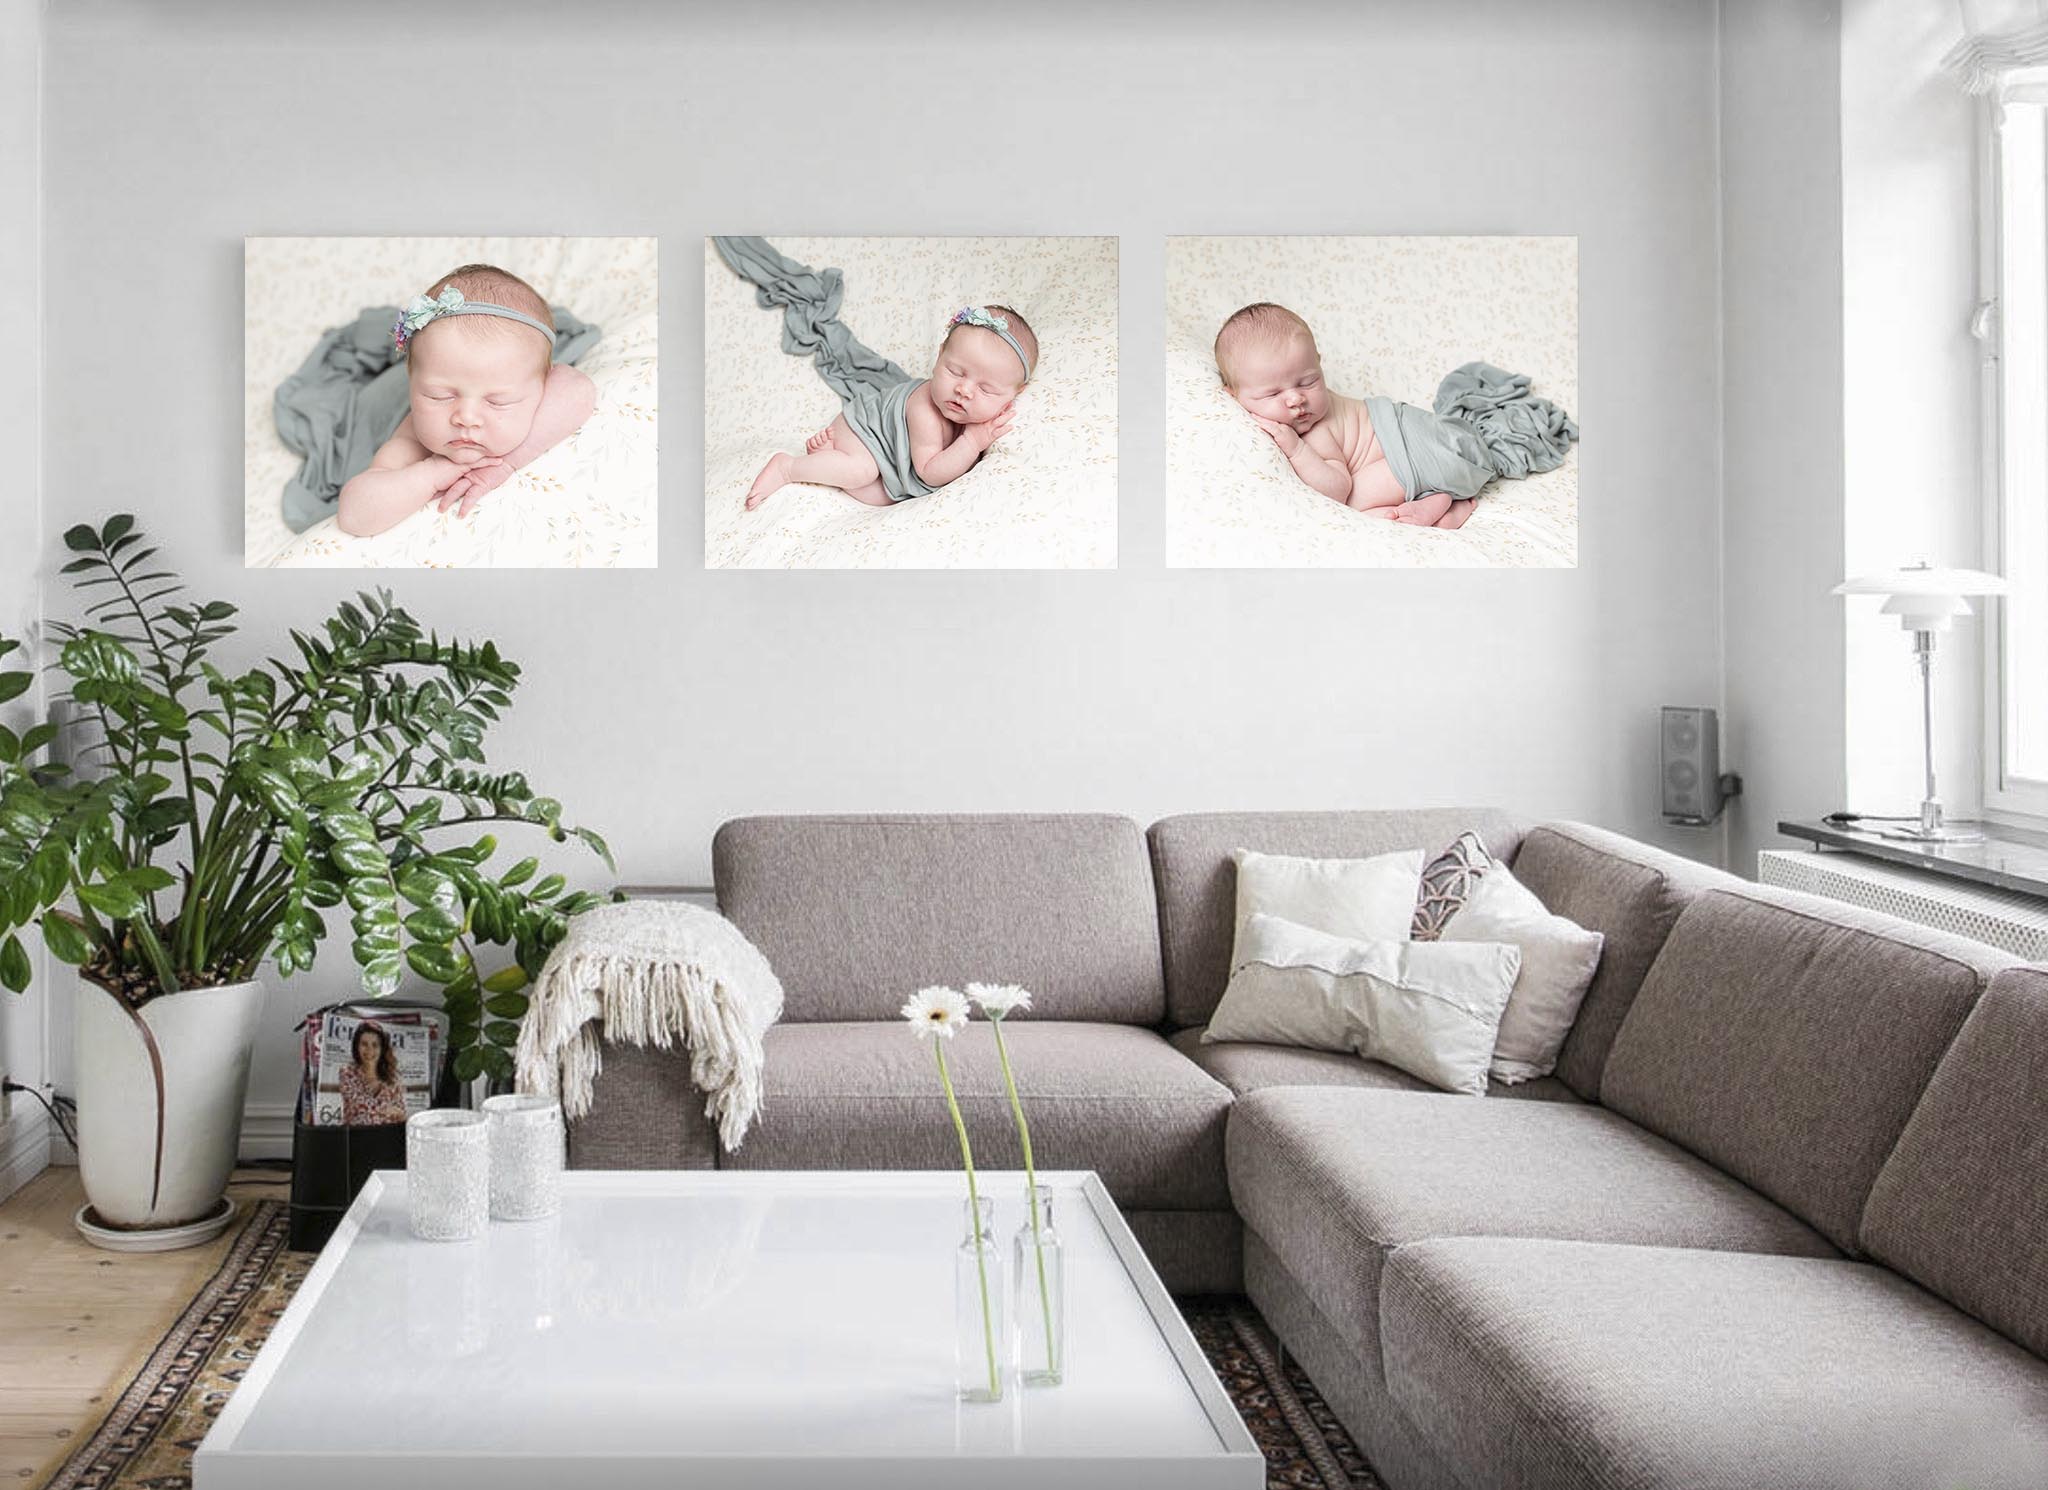 Image of photographs displayed on the wall of a living room